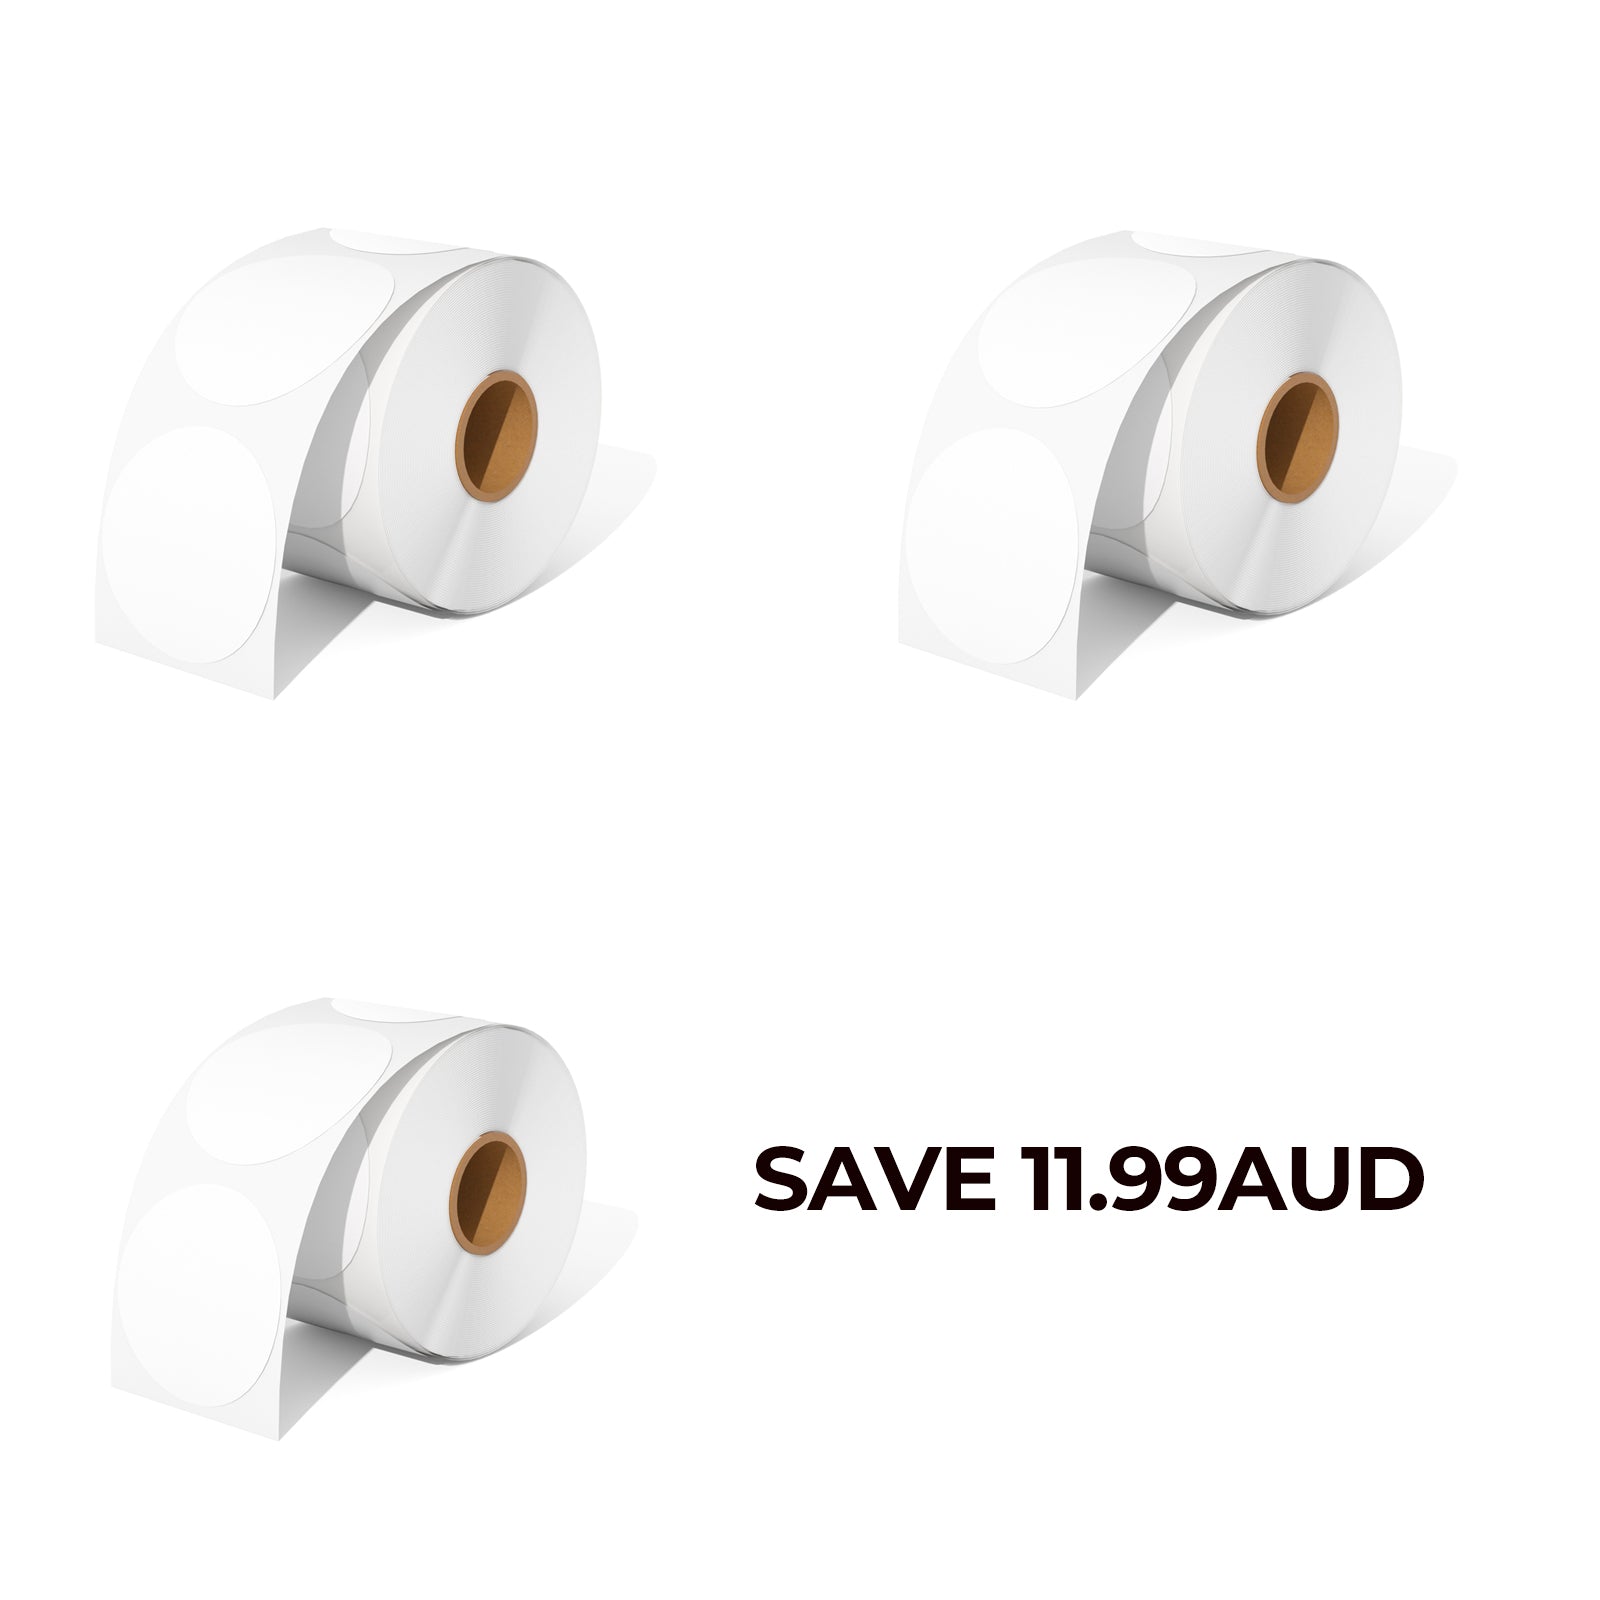 Save $11.99AUD on three rolls of blank thermal round labels.